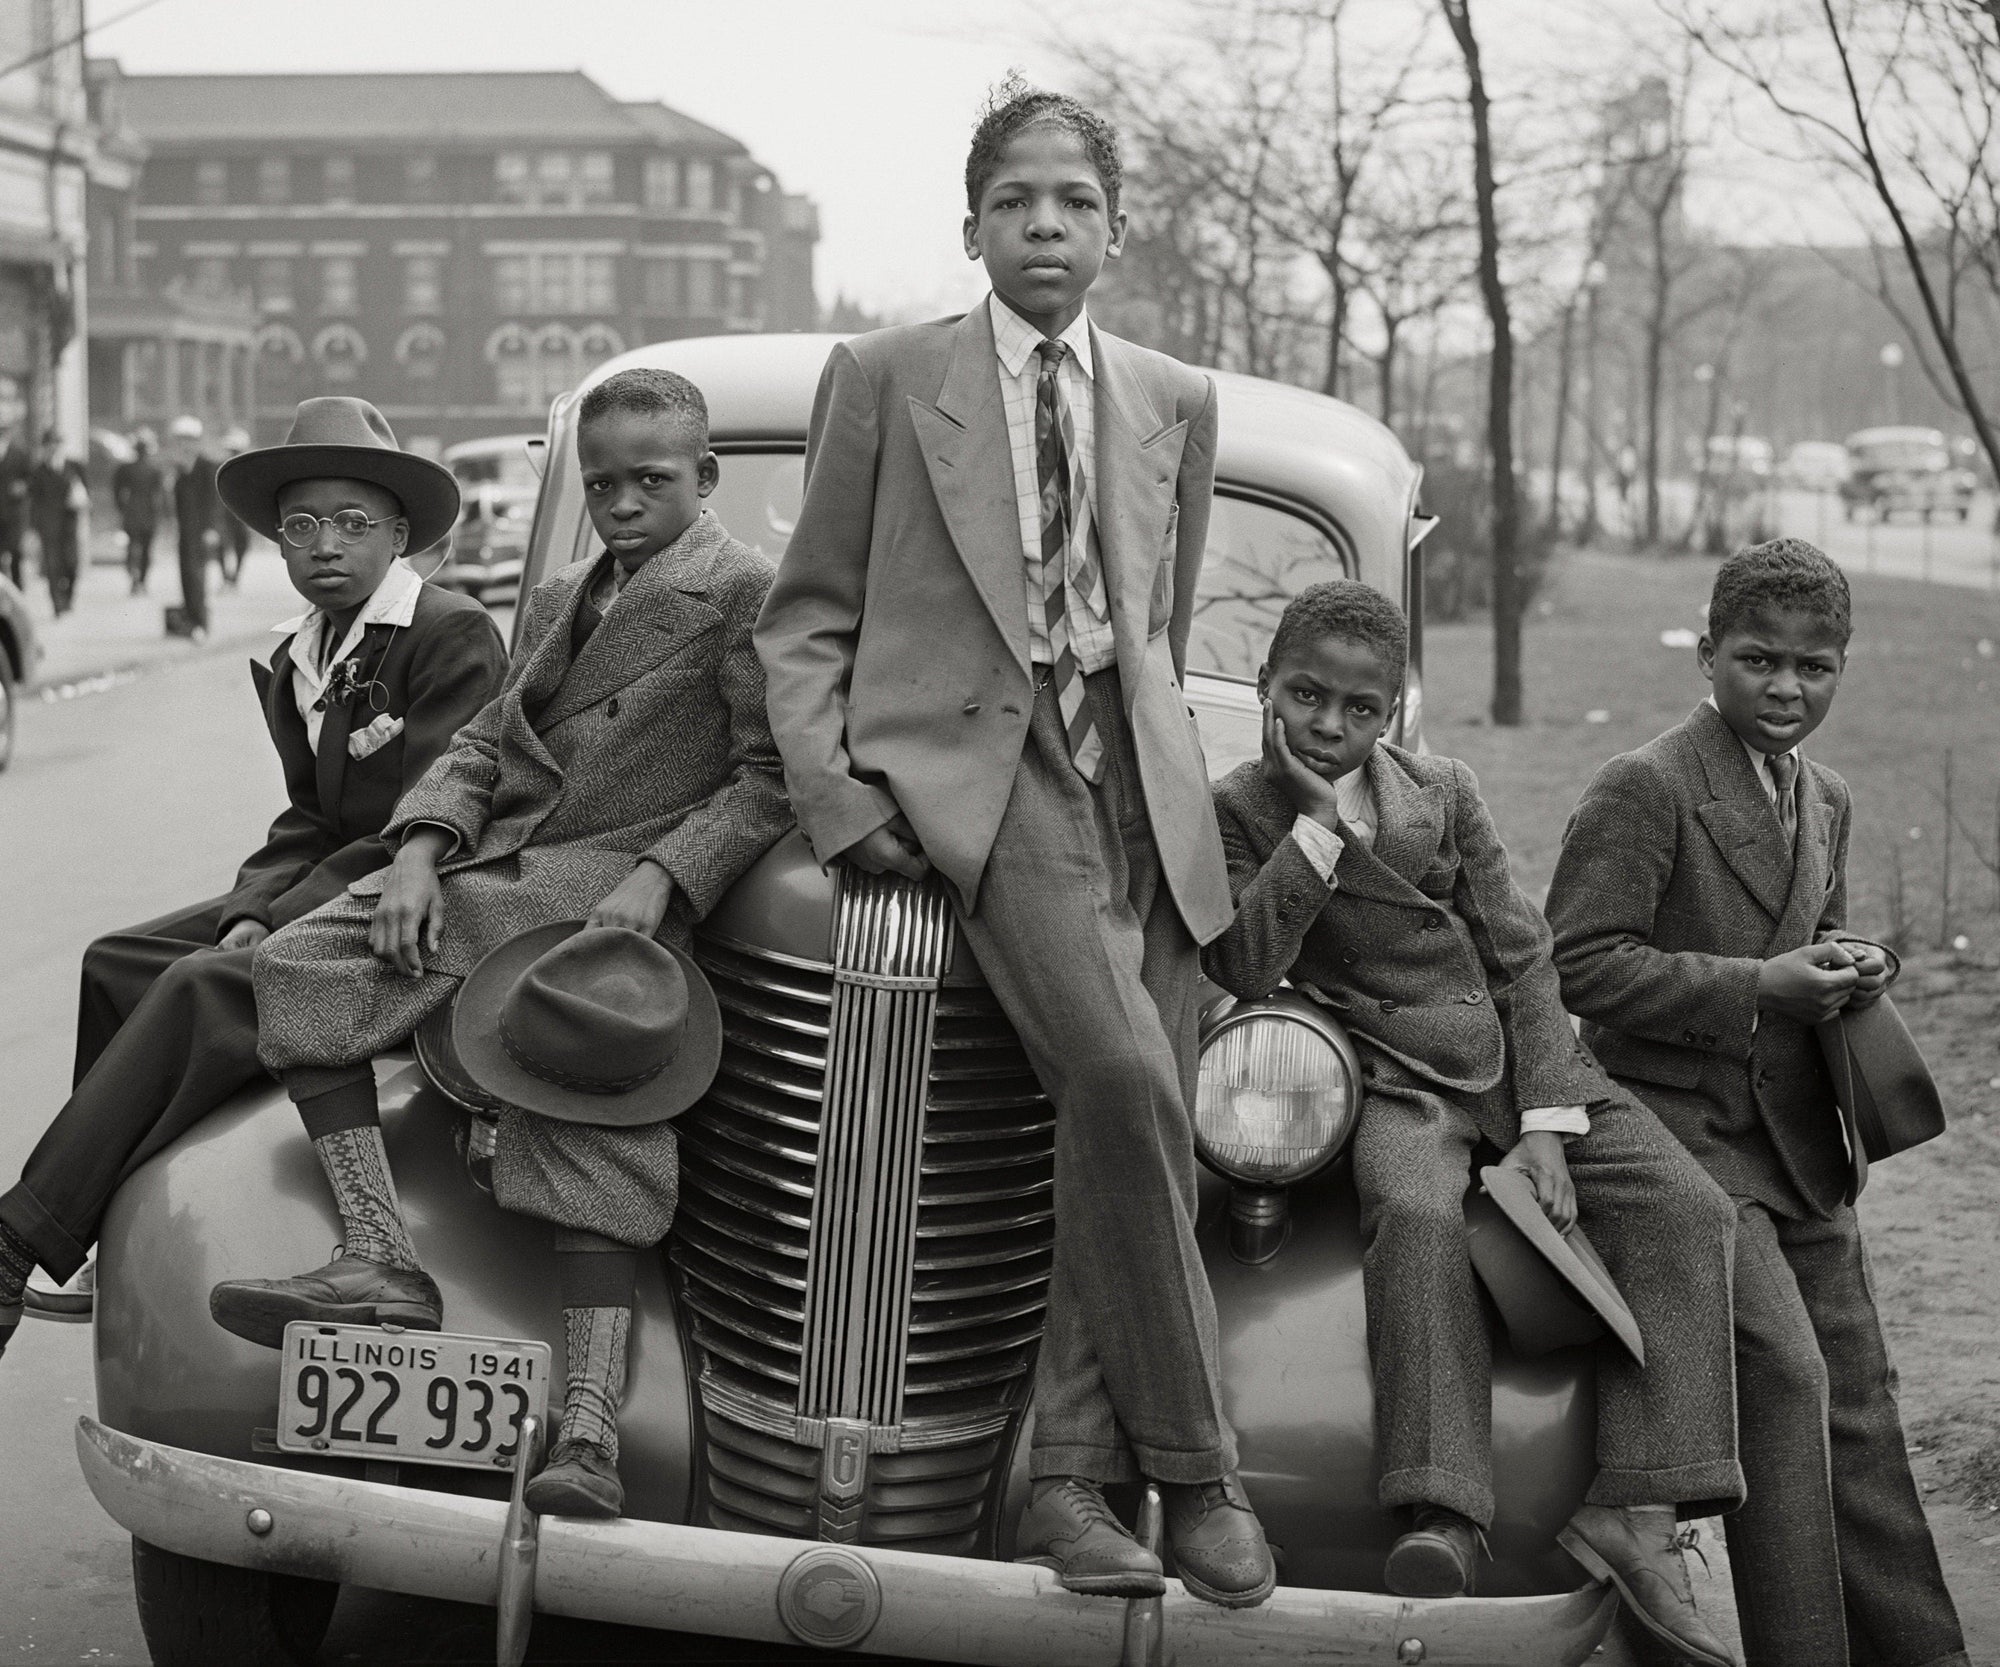 Five African American Boys on Car, South Side Chicago, 1941 by Russell Lee Historical Pix